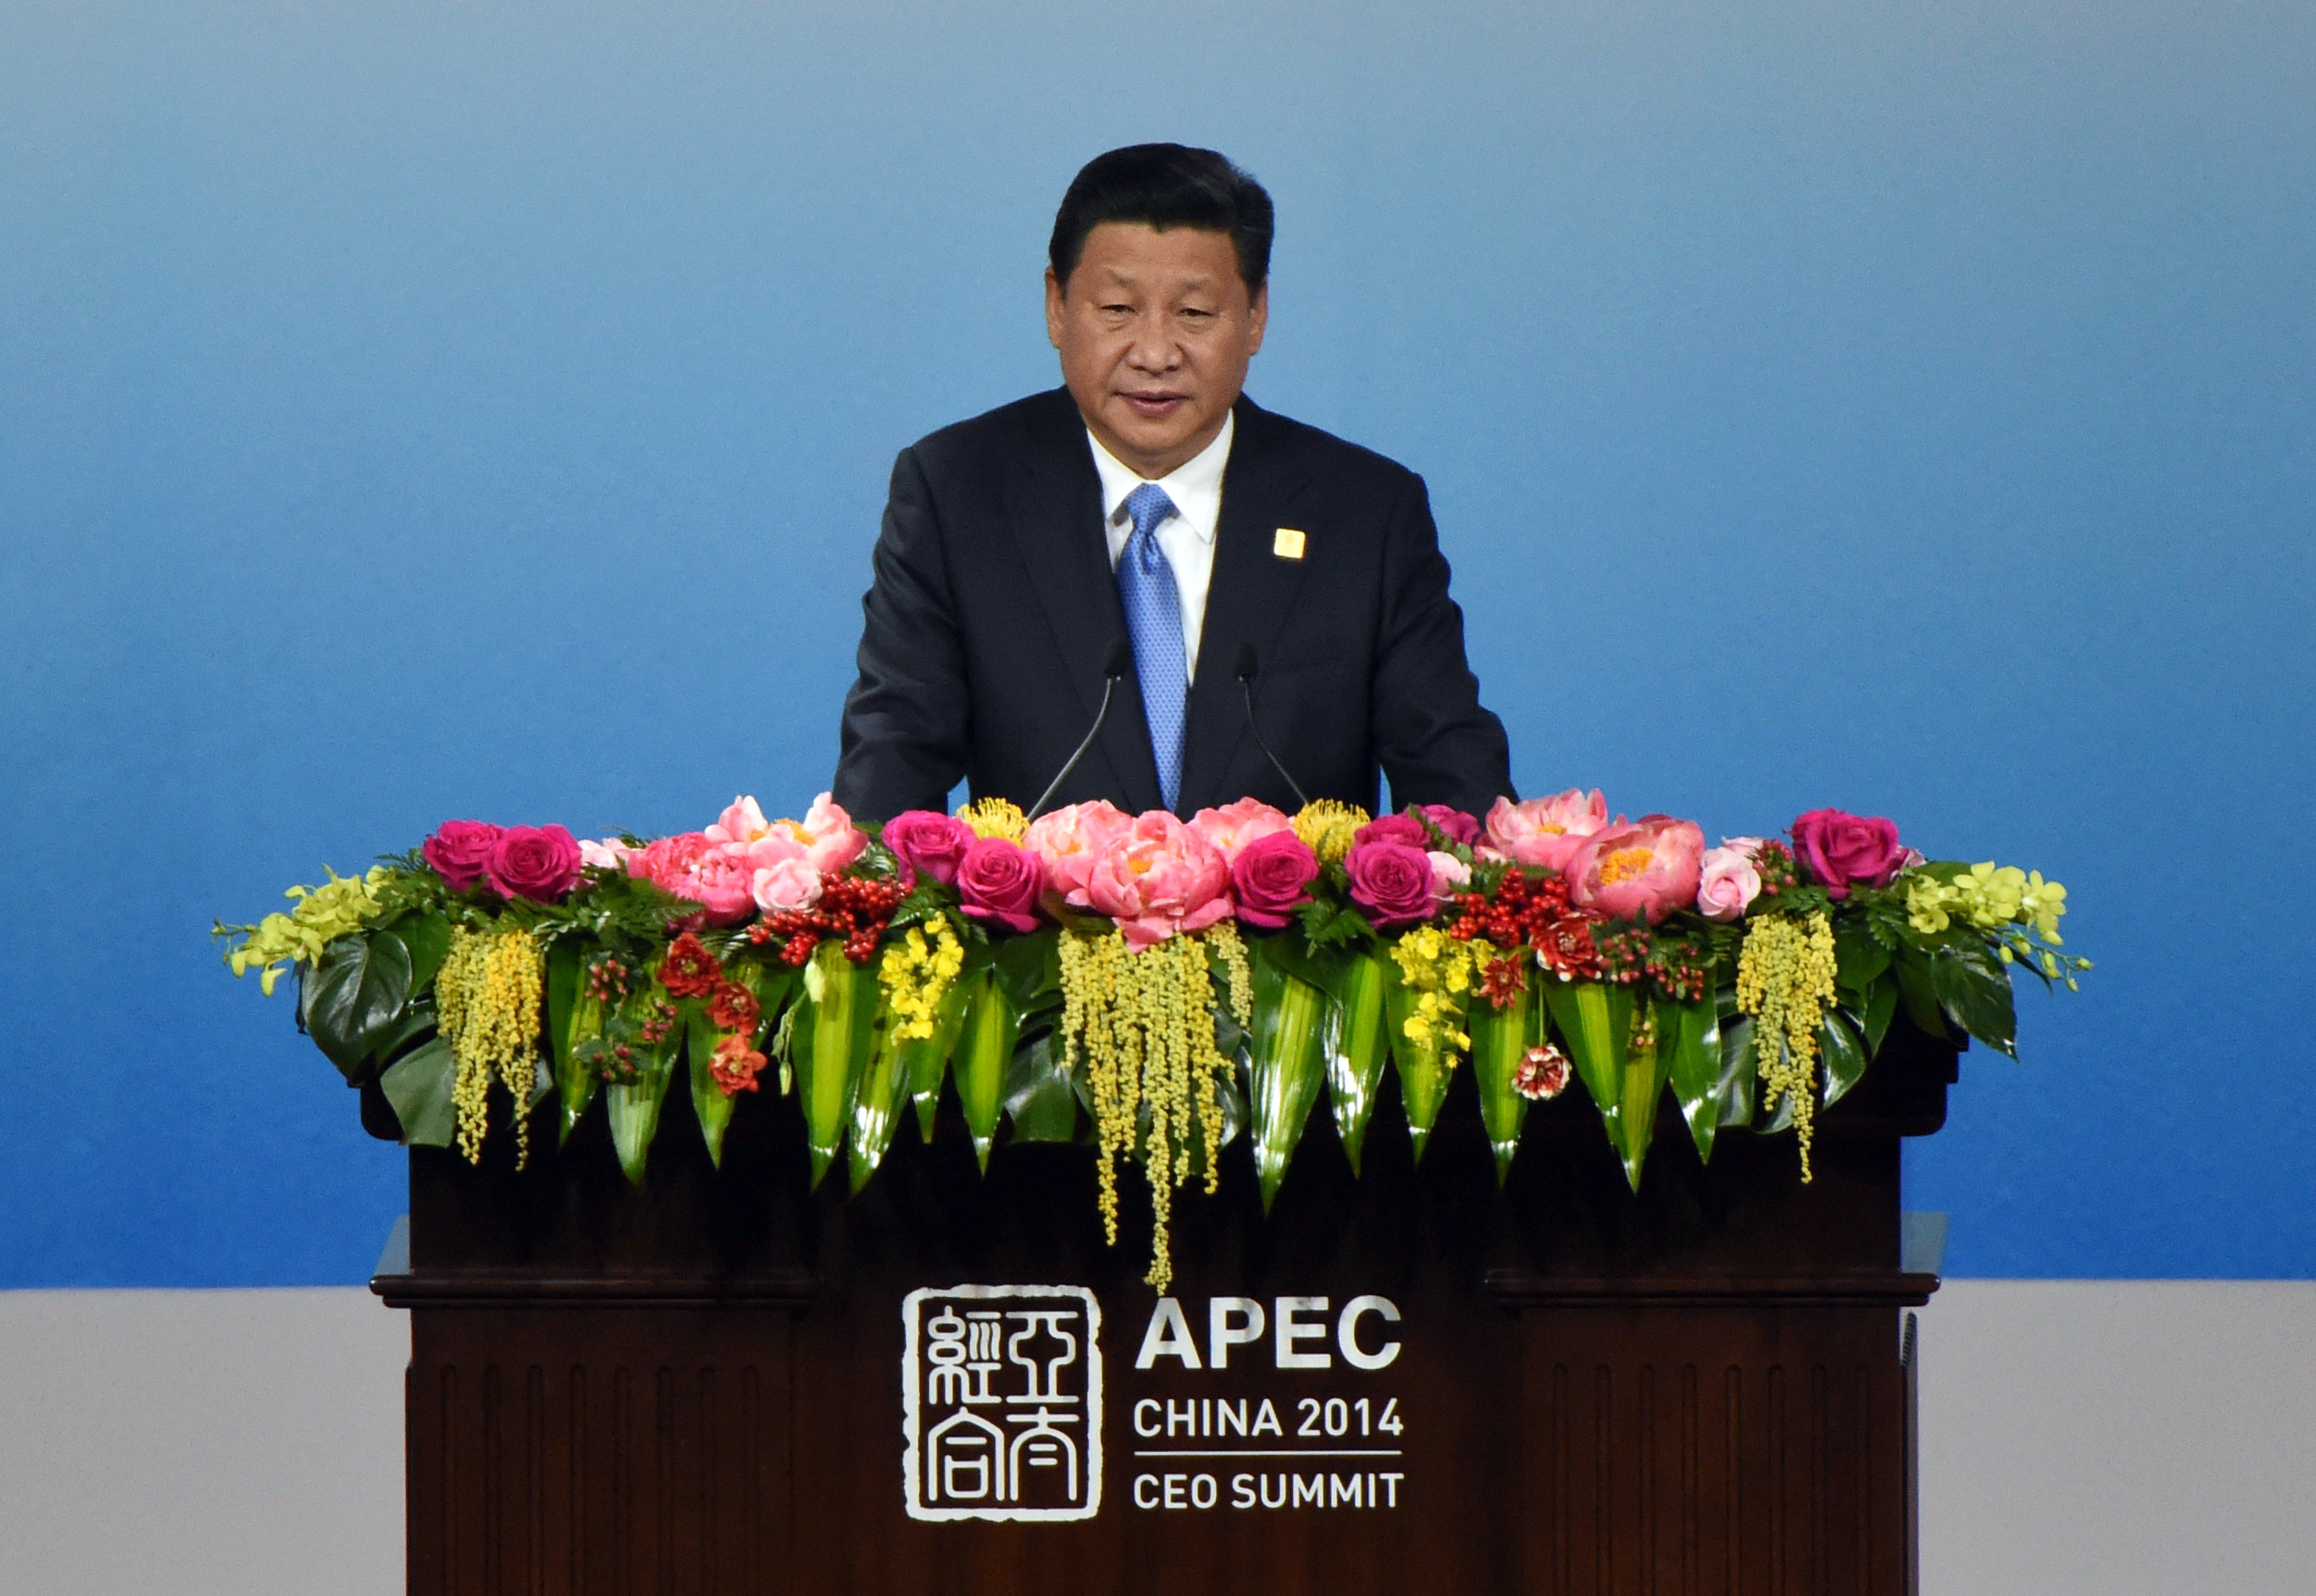 China's President Xi Jinping delivers an opening speech of the APEC CEO Summit as part of the Asia-Pacific Economic Cooperation (APEC) Summit at the China National Convention Center in Beijing, Sunday, Nov. 9, 2014. (AP Photo/Wang Zhao, Pool)